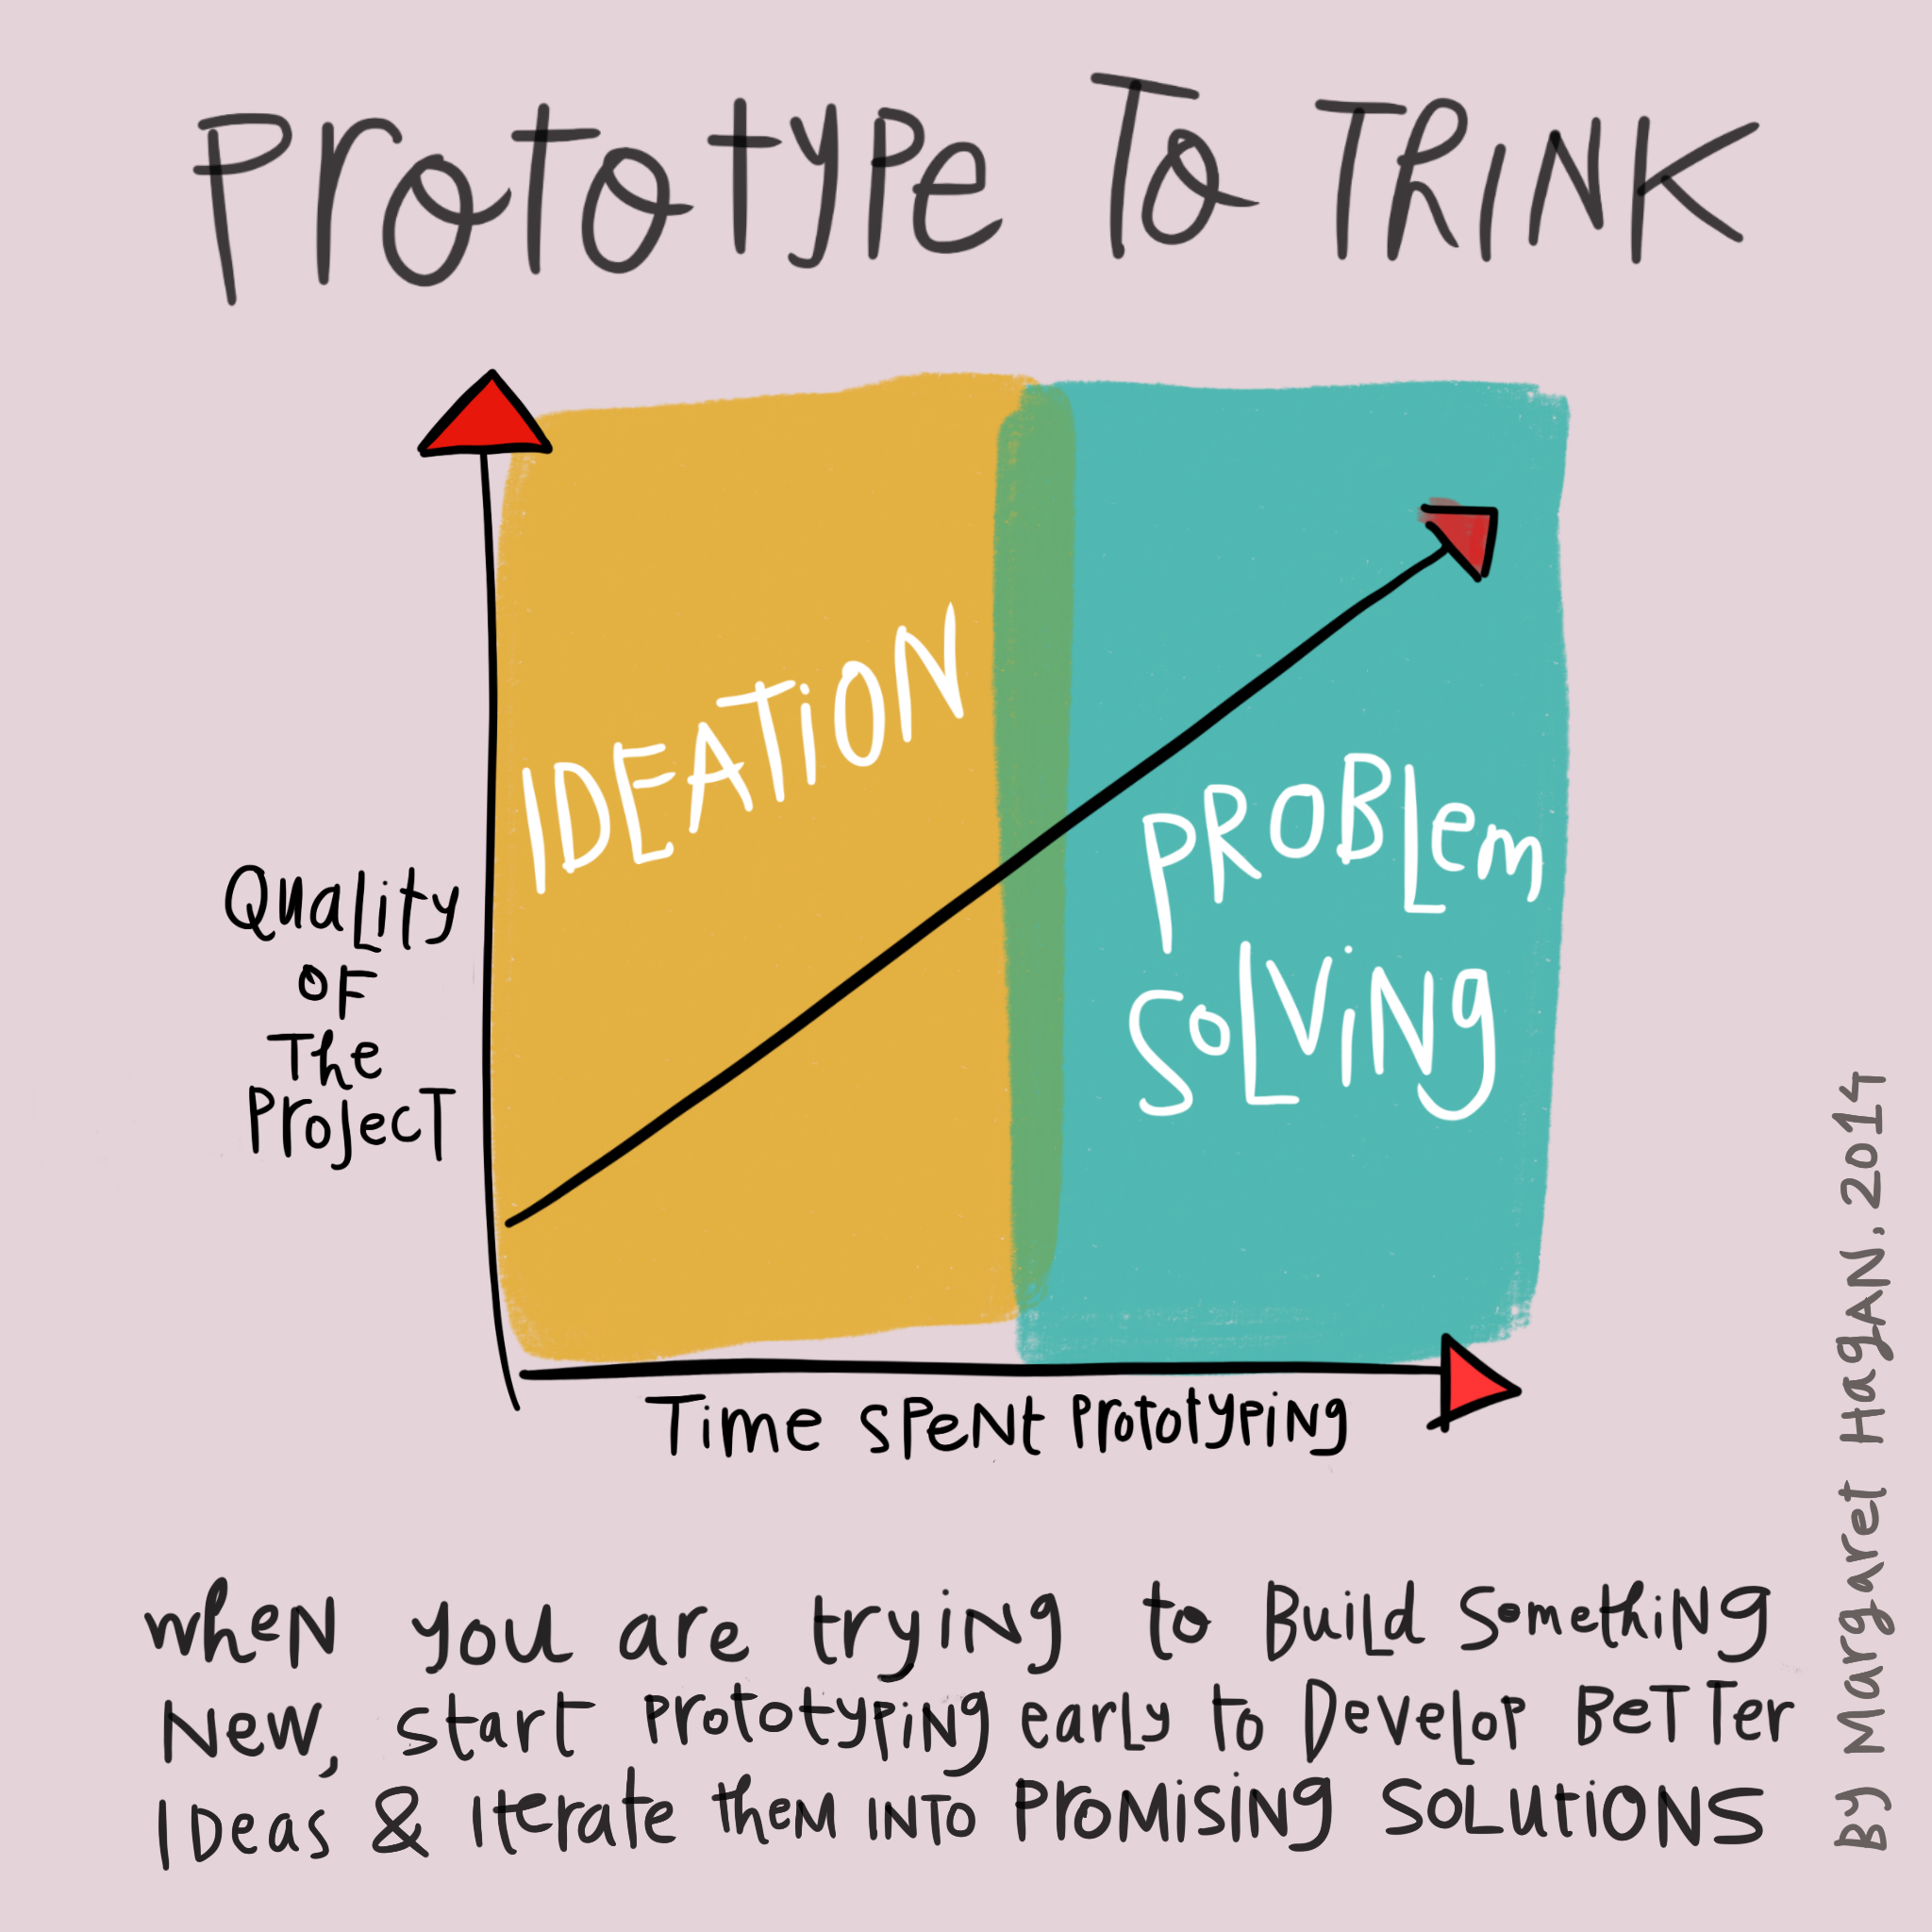 Design Process note on Prototyping to THink by Margaret Hagan